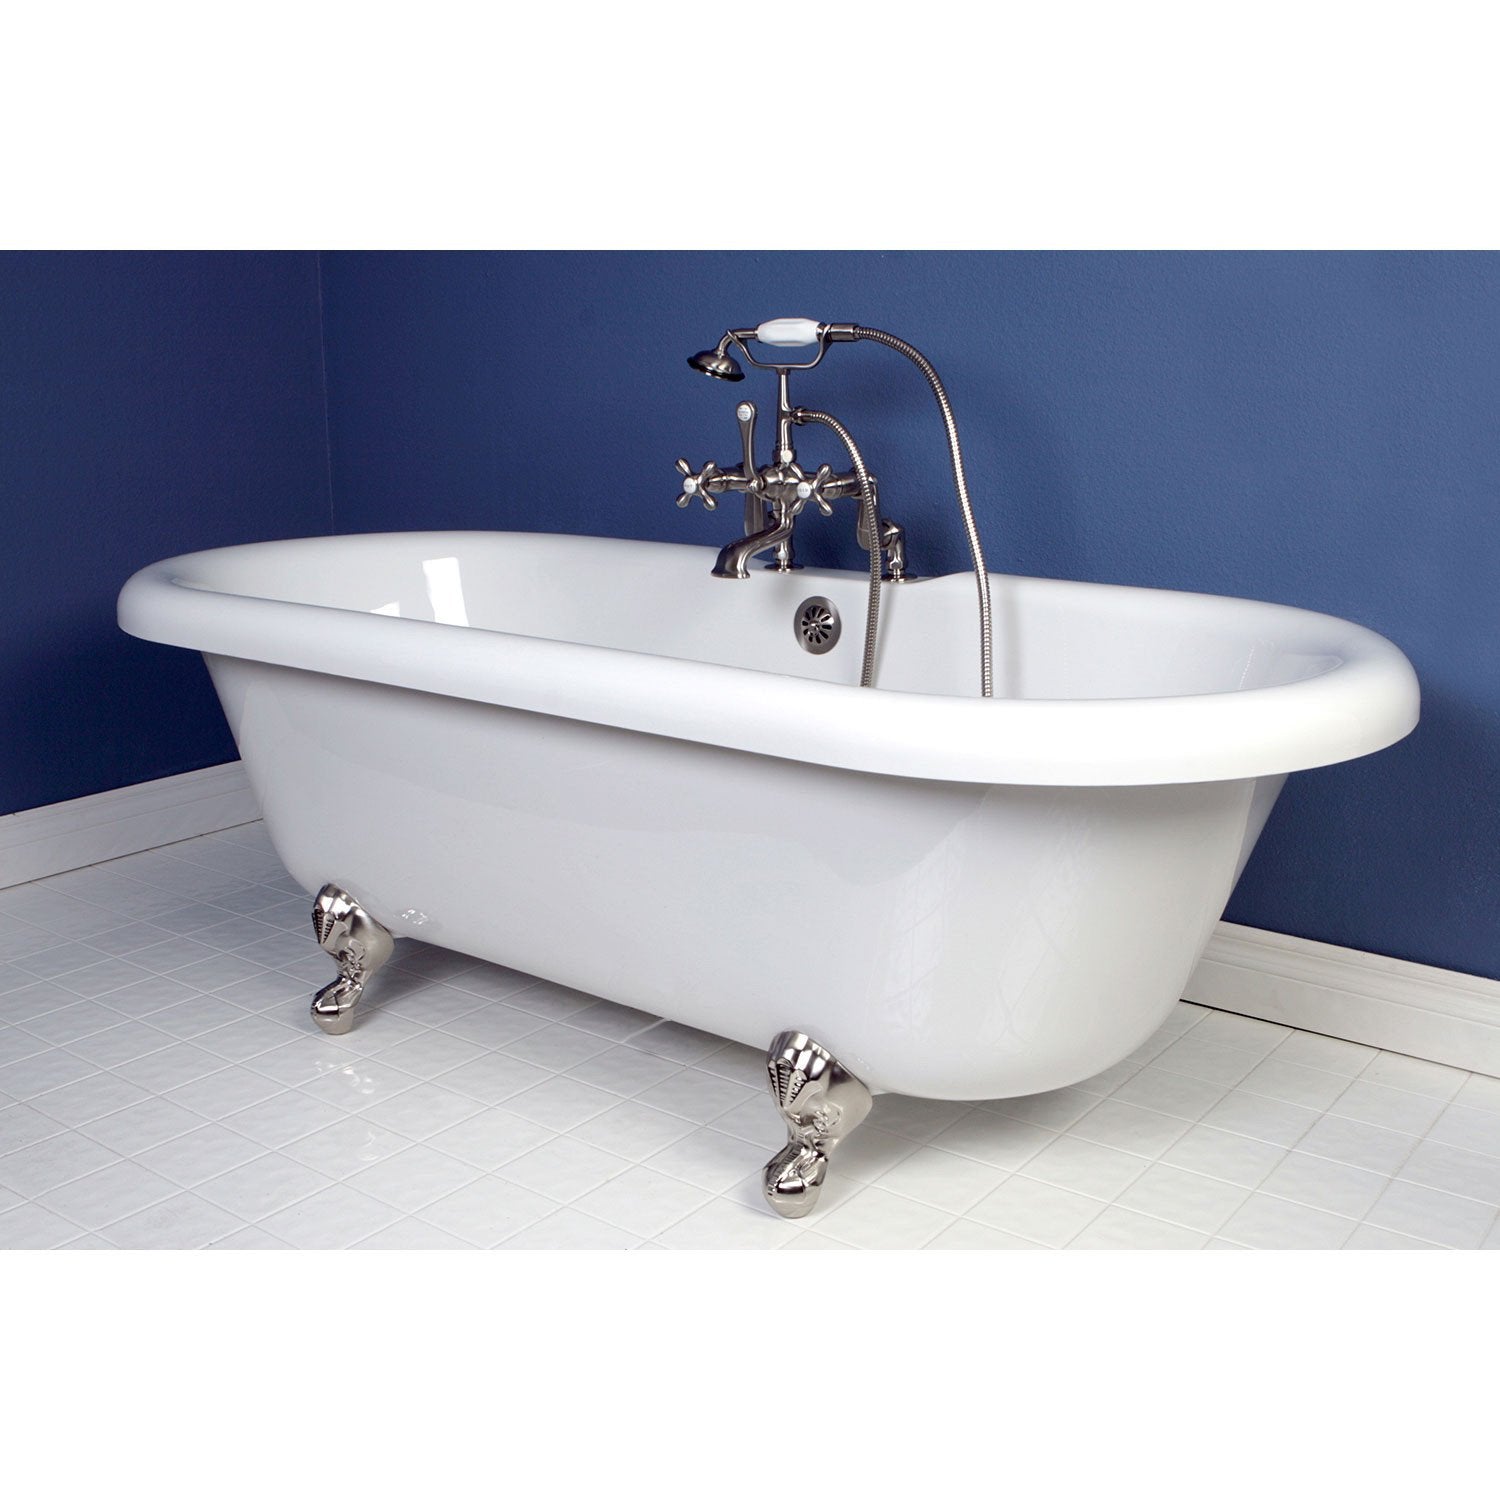 67 Acrylic Clawfoot Tub With Satin Nickel Tub Faucet Hardware Package Ctp47